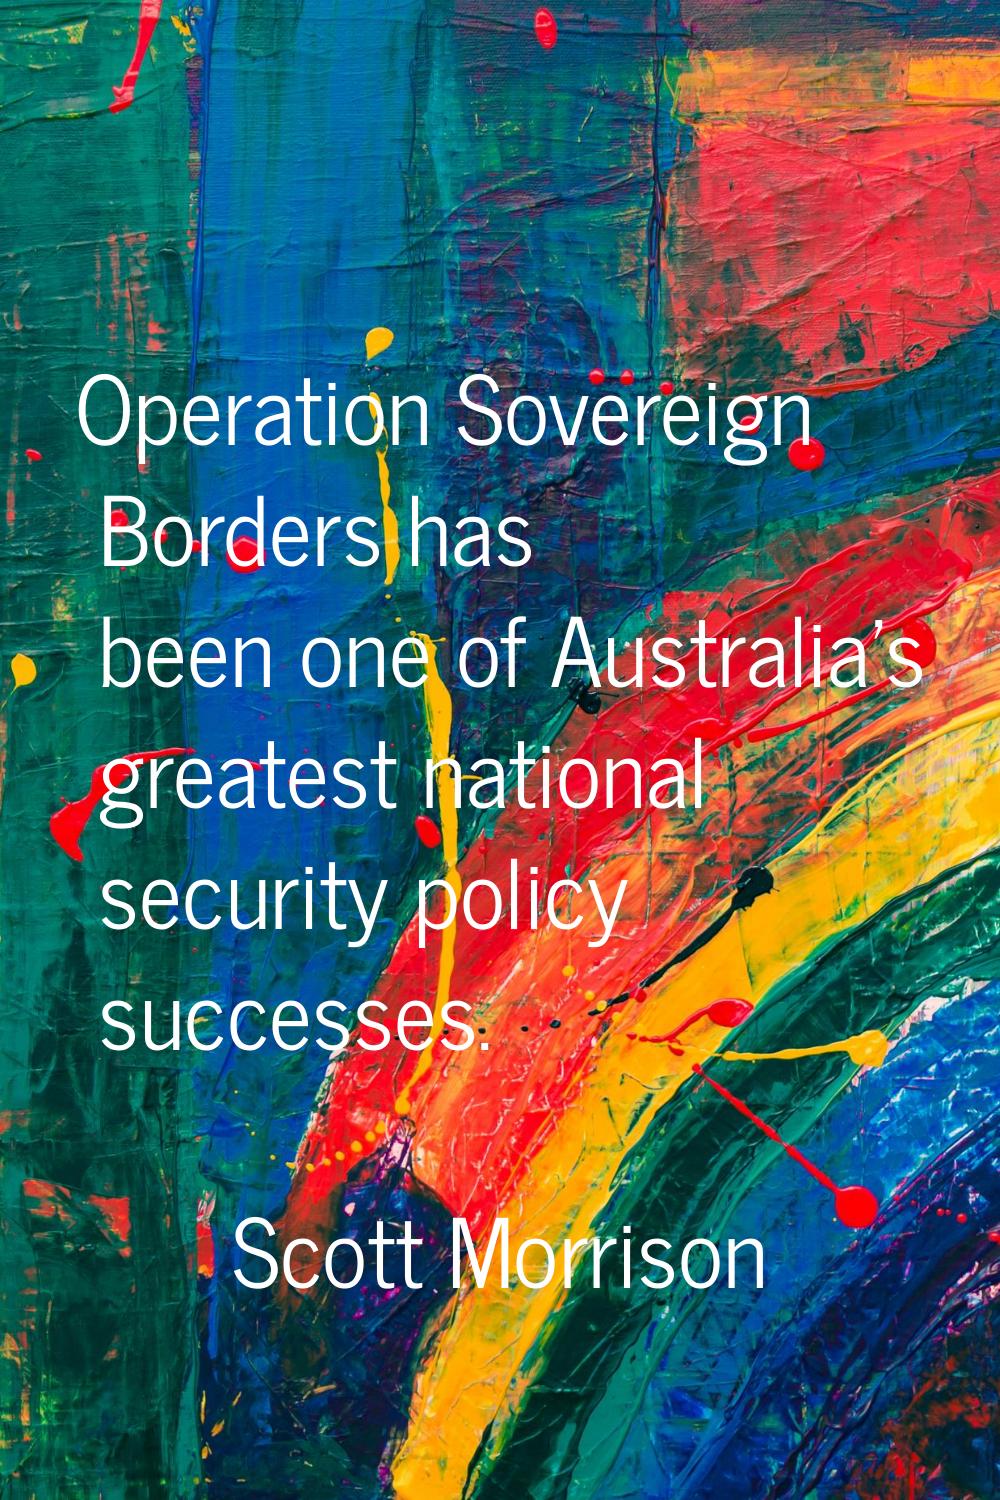 Operation Sovereign Borders has been one of Australia's greatest national security policy successes